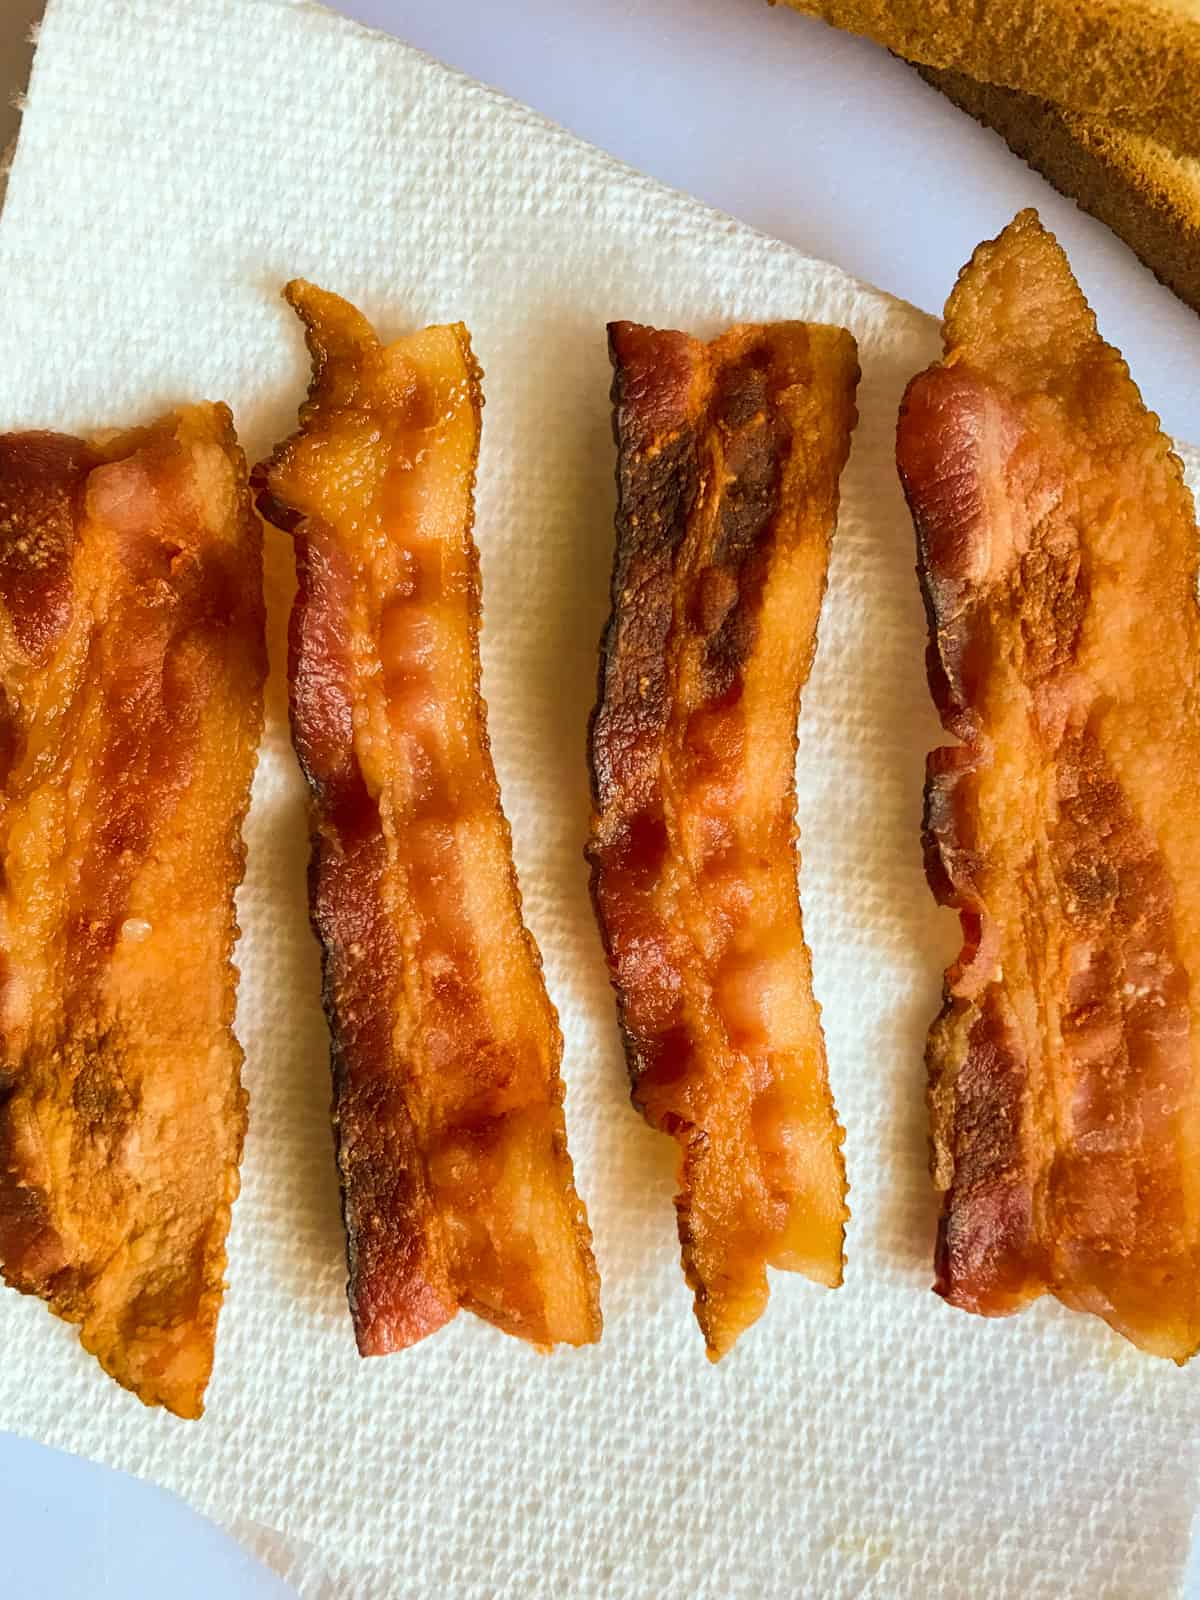 Cooked bacon, cut in half.